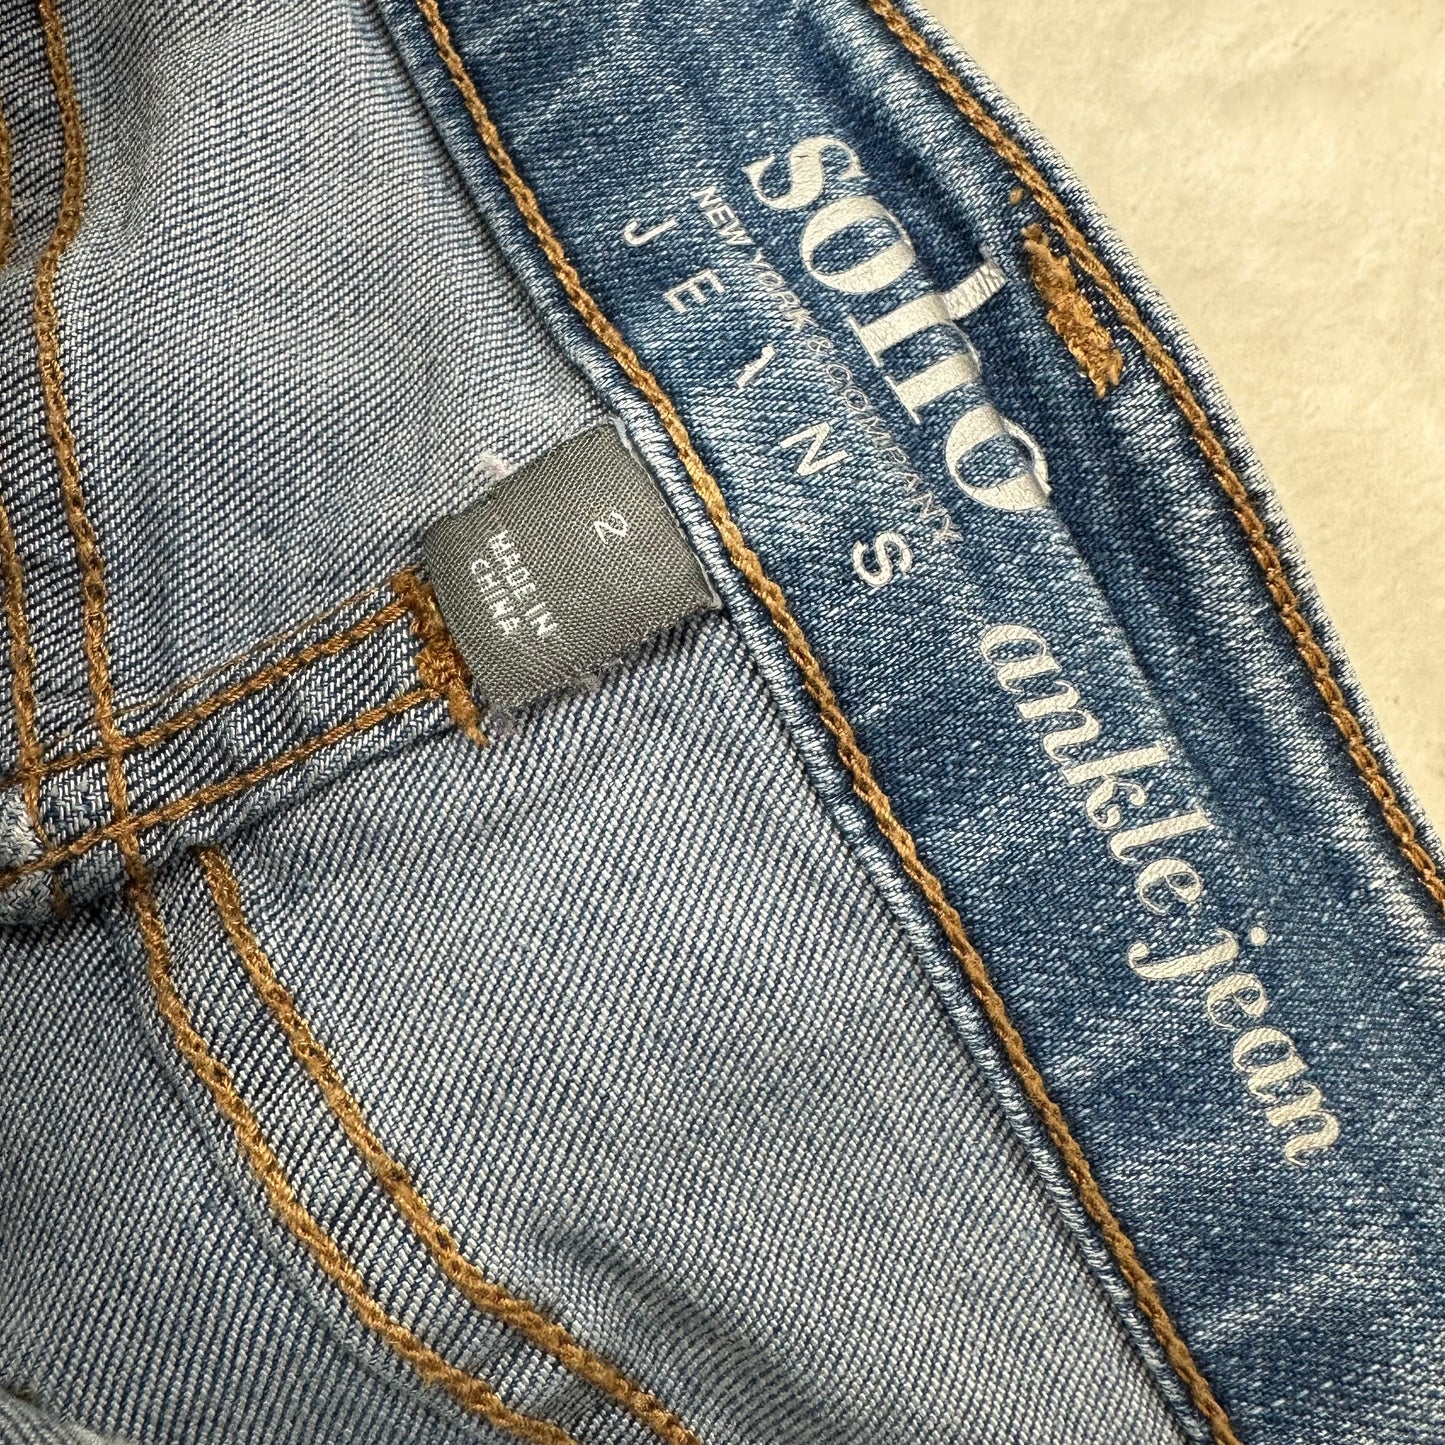 Jeans Straight By Soho Design Group  Size: 2